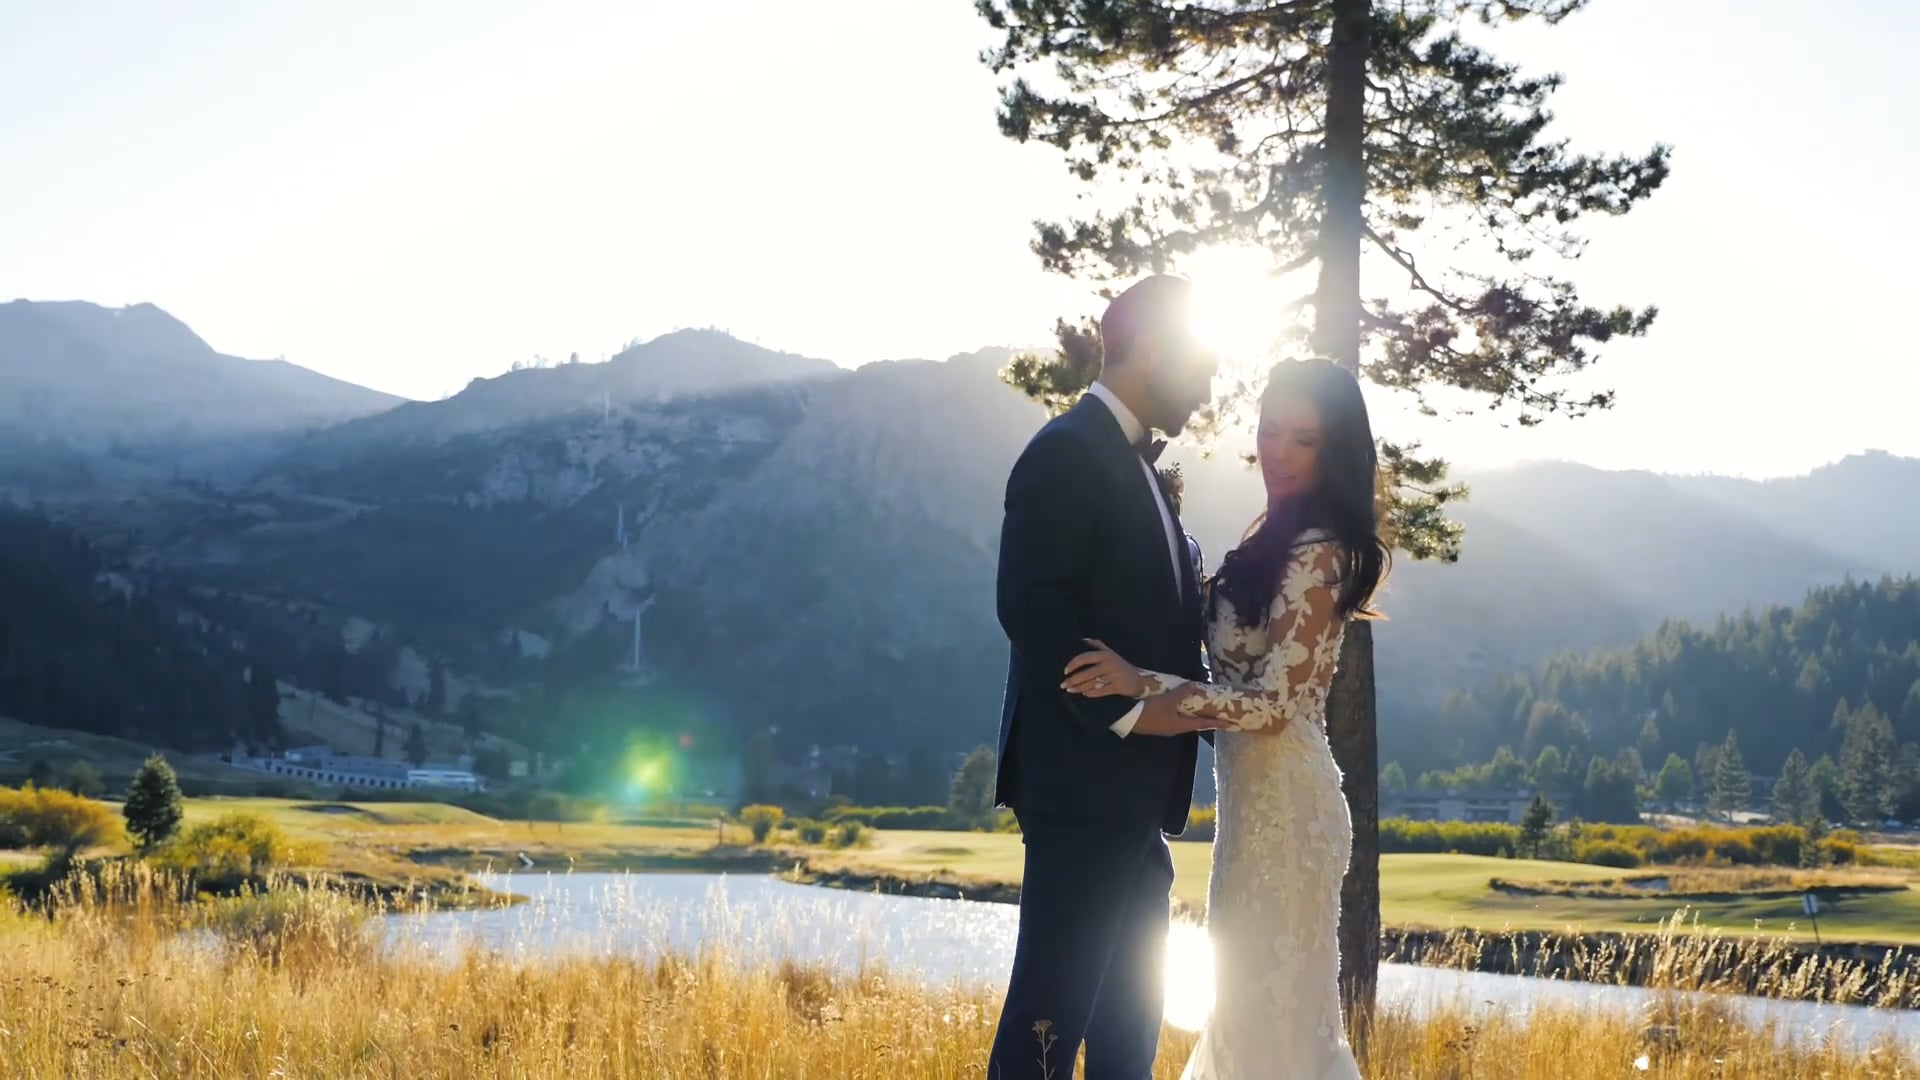 R + T's Breathtaking Wedding at The Resort at Squaw Valley